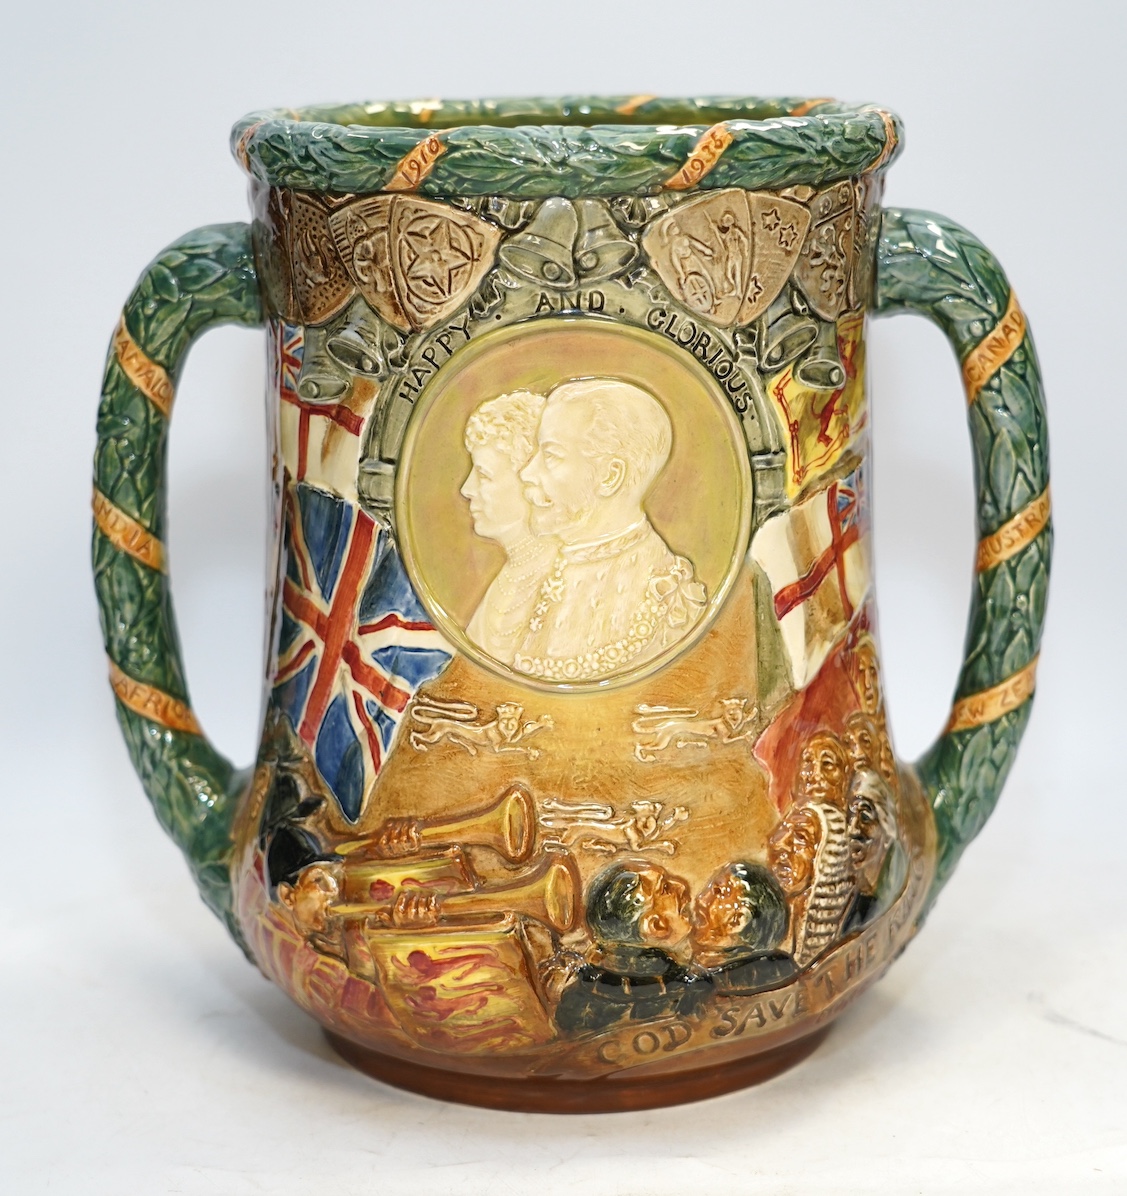 A Doulton limited edition commemorative loving cup, George V and Mary silver jubilee, 804/1000, 26cm. Condition - fine crazing to glaze, good